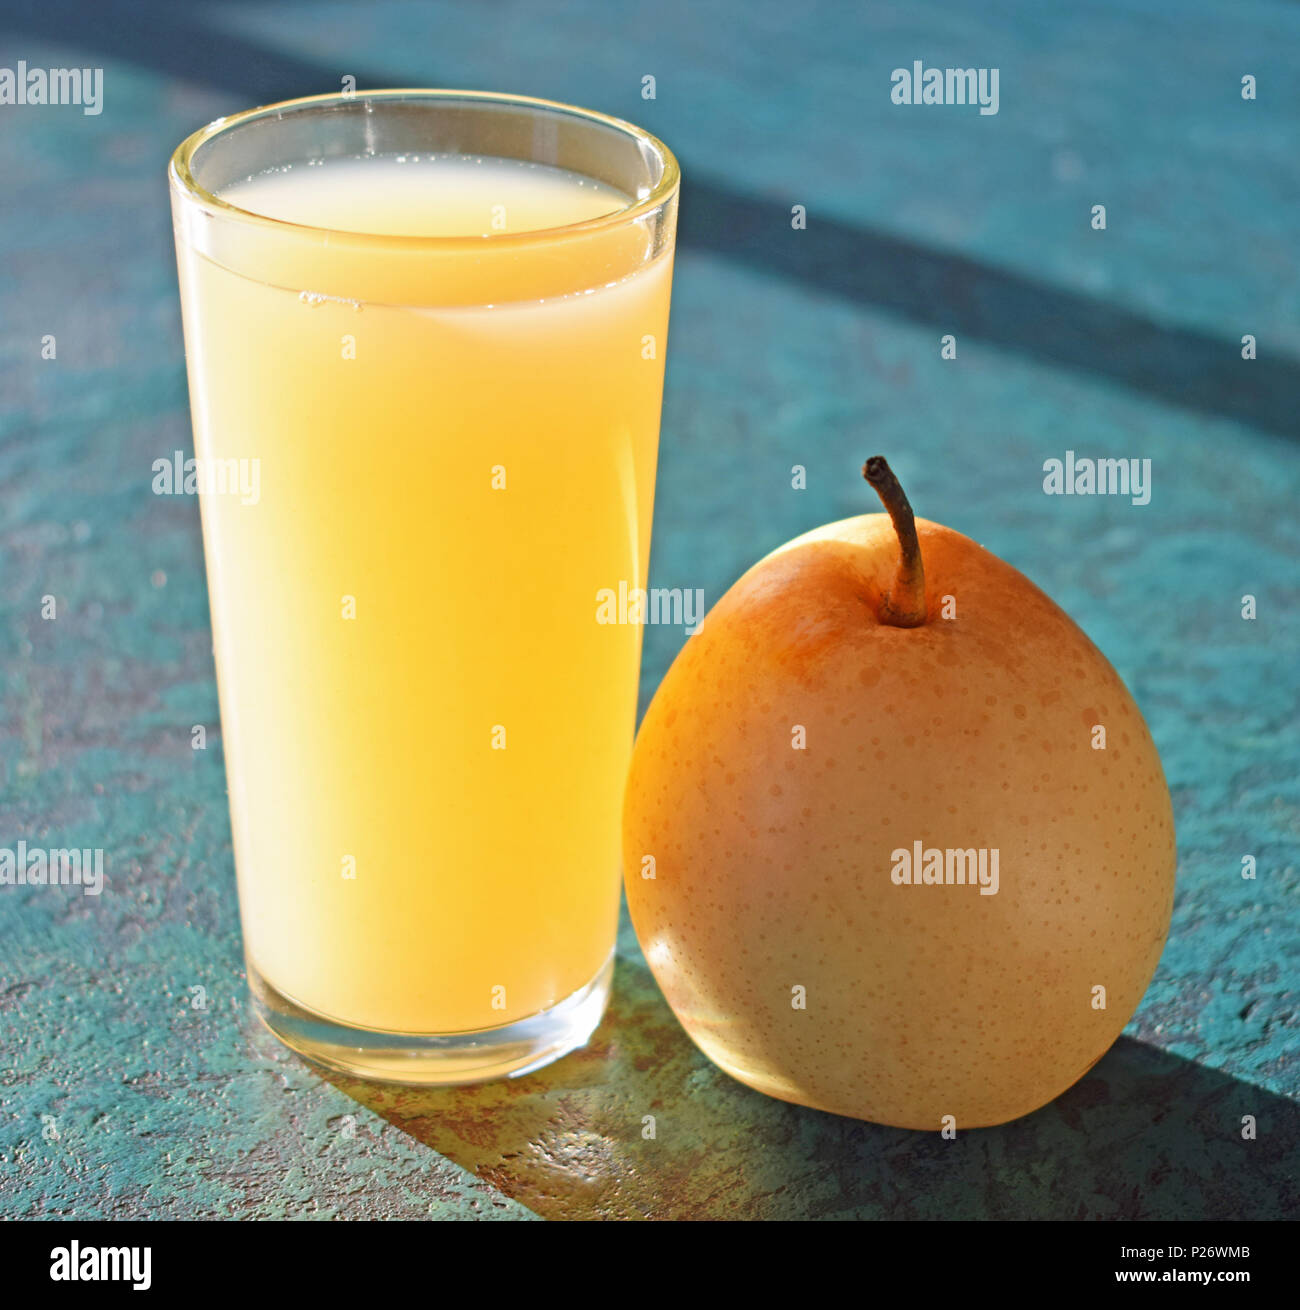 pear juice and pear Stock Photo